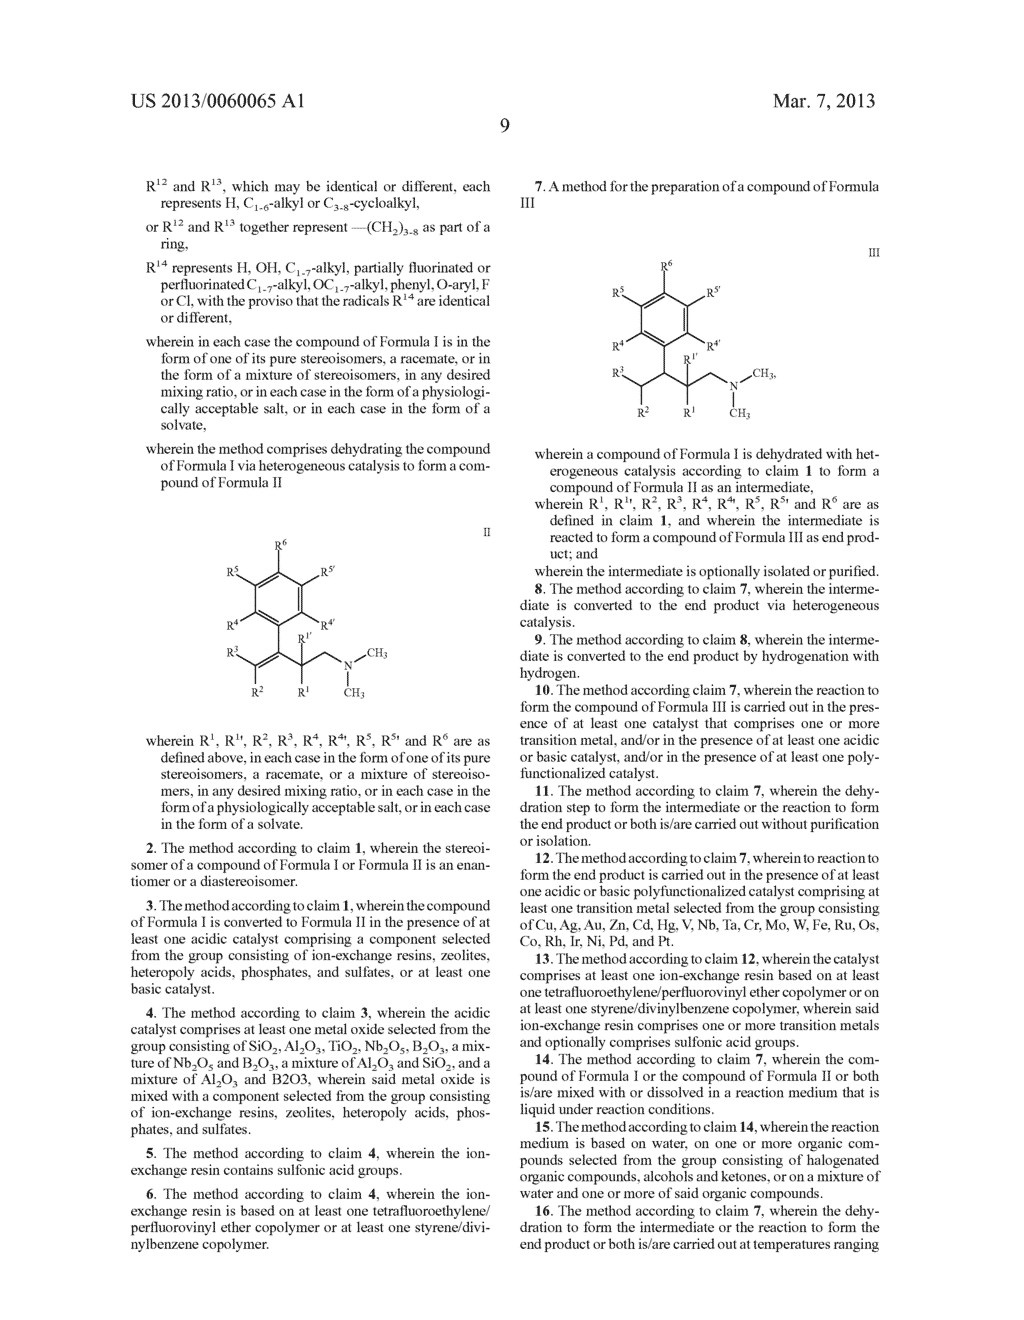 Process for the Dehydration of Substituted     4-Dimethylamino-2-aryl-butan-2-ol Compounds and Process for the     Preparation of Substituted Dimethyl-(3-aryl-butyl)- Amine Compounds by     Heterogeneous Catalysis - diagram, schematic, and image 10